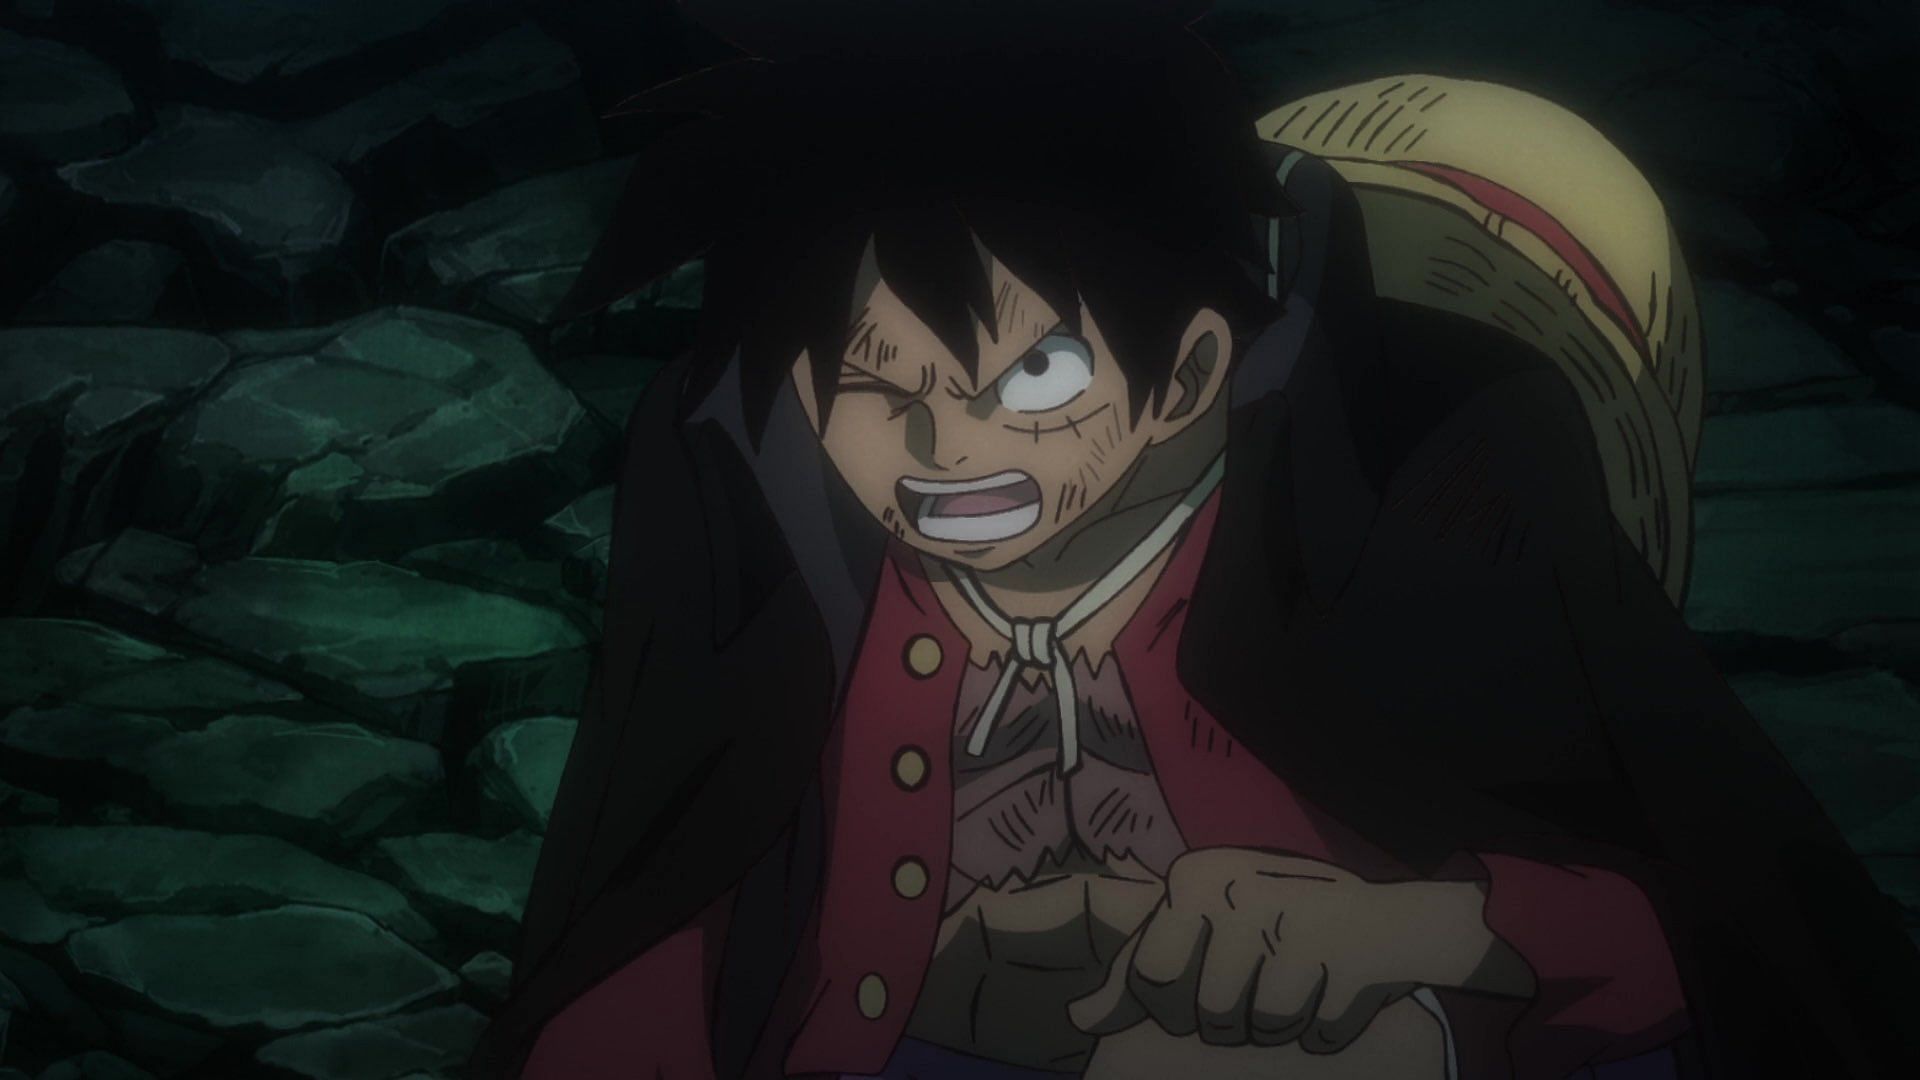 Luffy will keep his promise to save the Land of Wano no matter what in One Piece Episode 1026 (Image via Eiichiro Oda/Shueisha, Viz Media, One Piece)